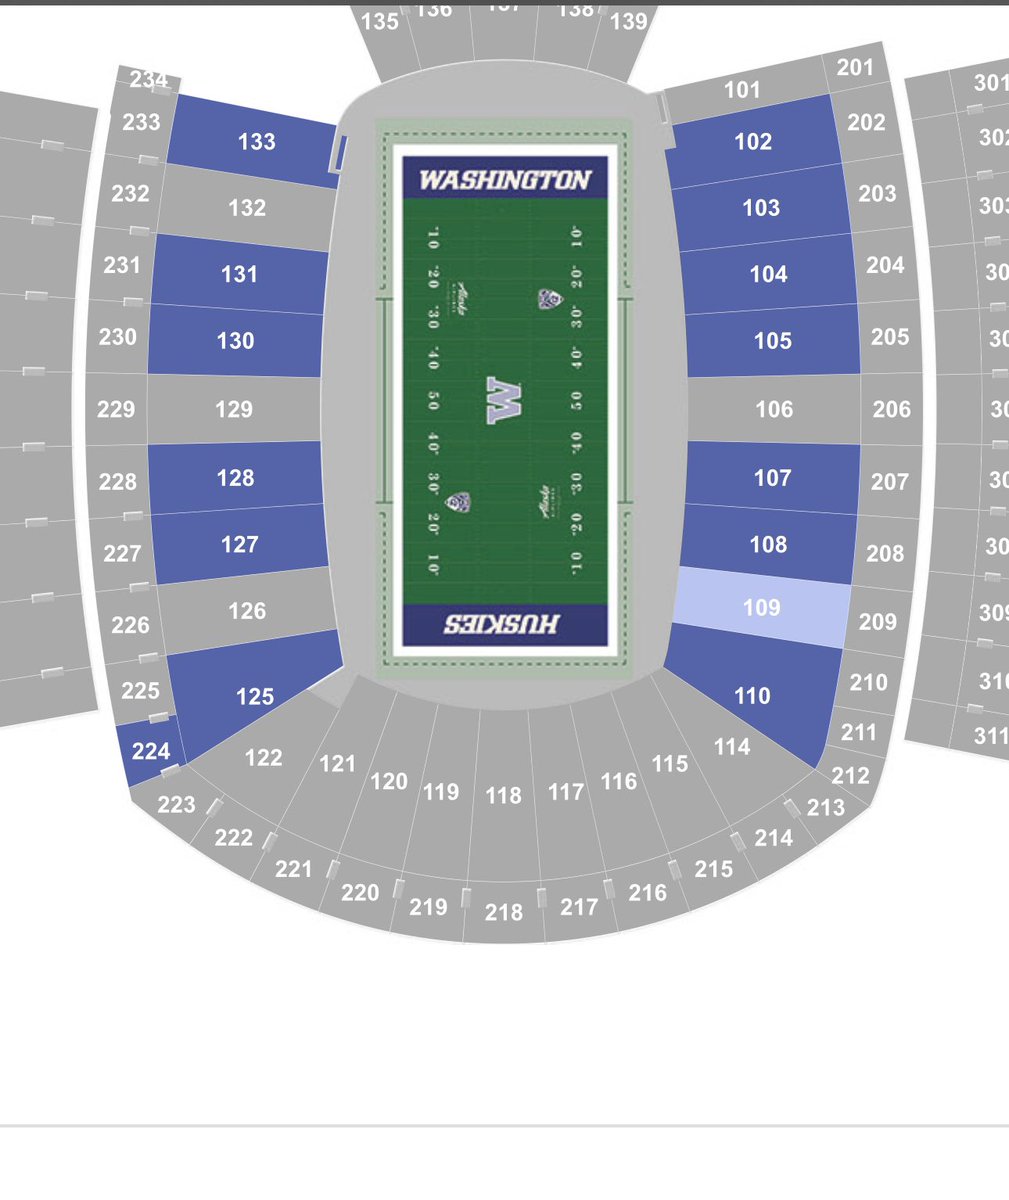 Two 100-Level @UW_Football tix for tomorrow’s home opener at 12:30 PM vs @BroncoSportsFB. Great seats on the aisle. $80 total Section 125 Row 37 Seats 1 & 2 DM me if you are interested.